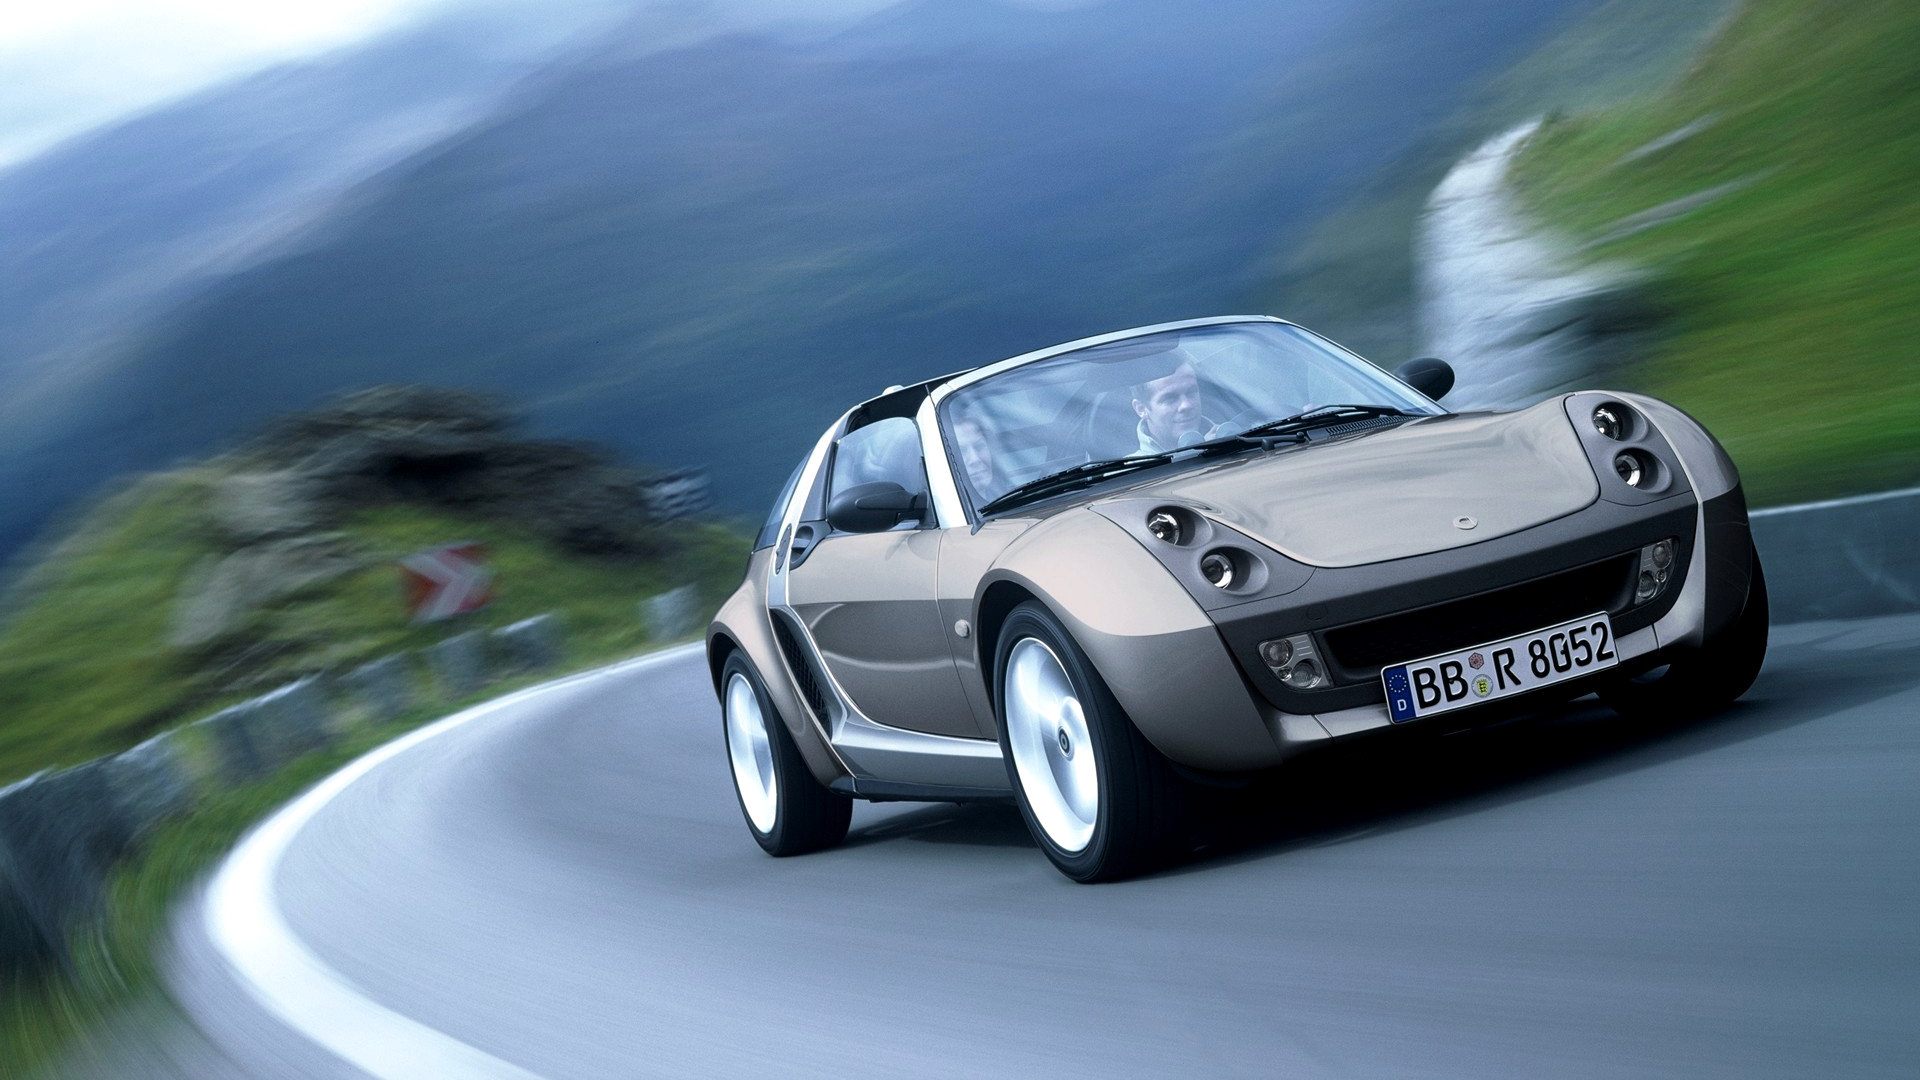 Smart Roadster Coupe 2